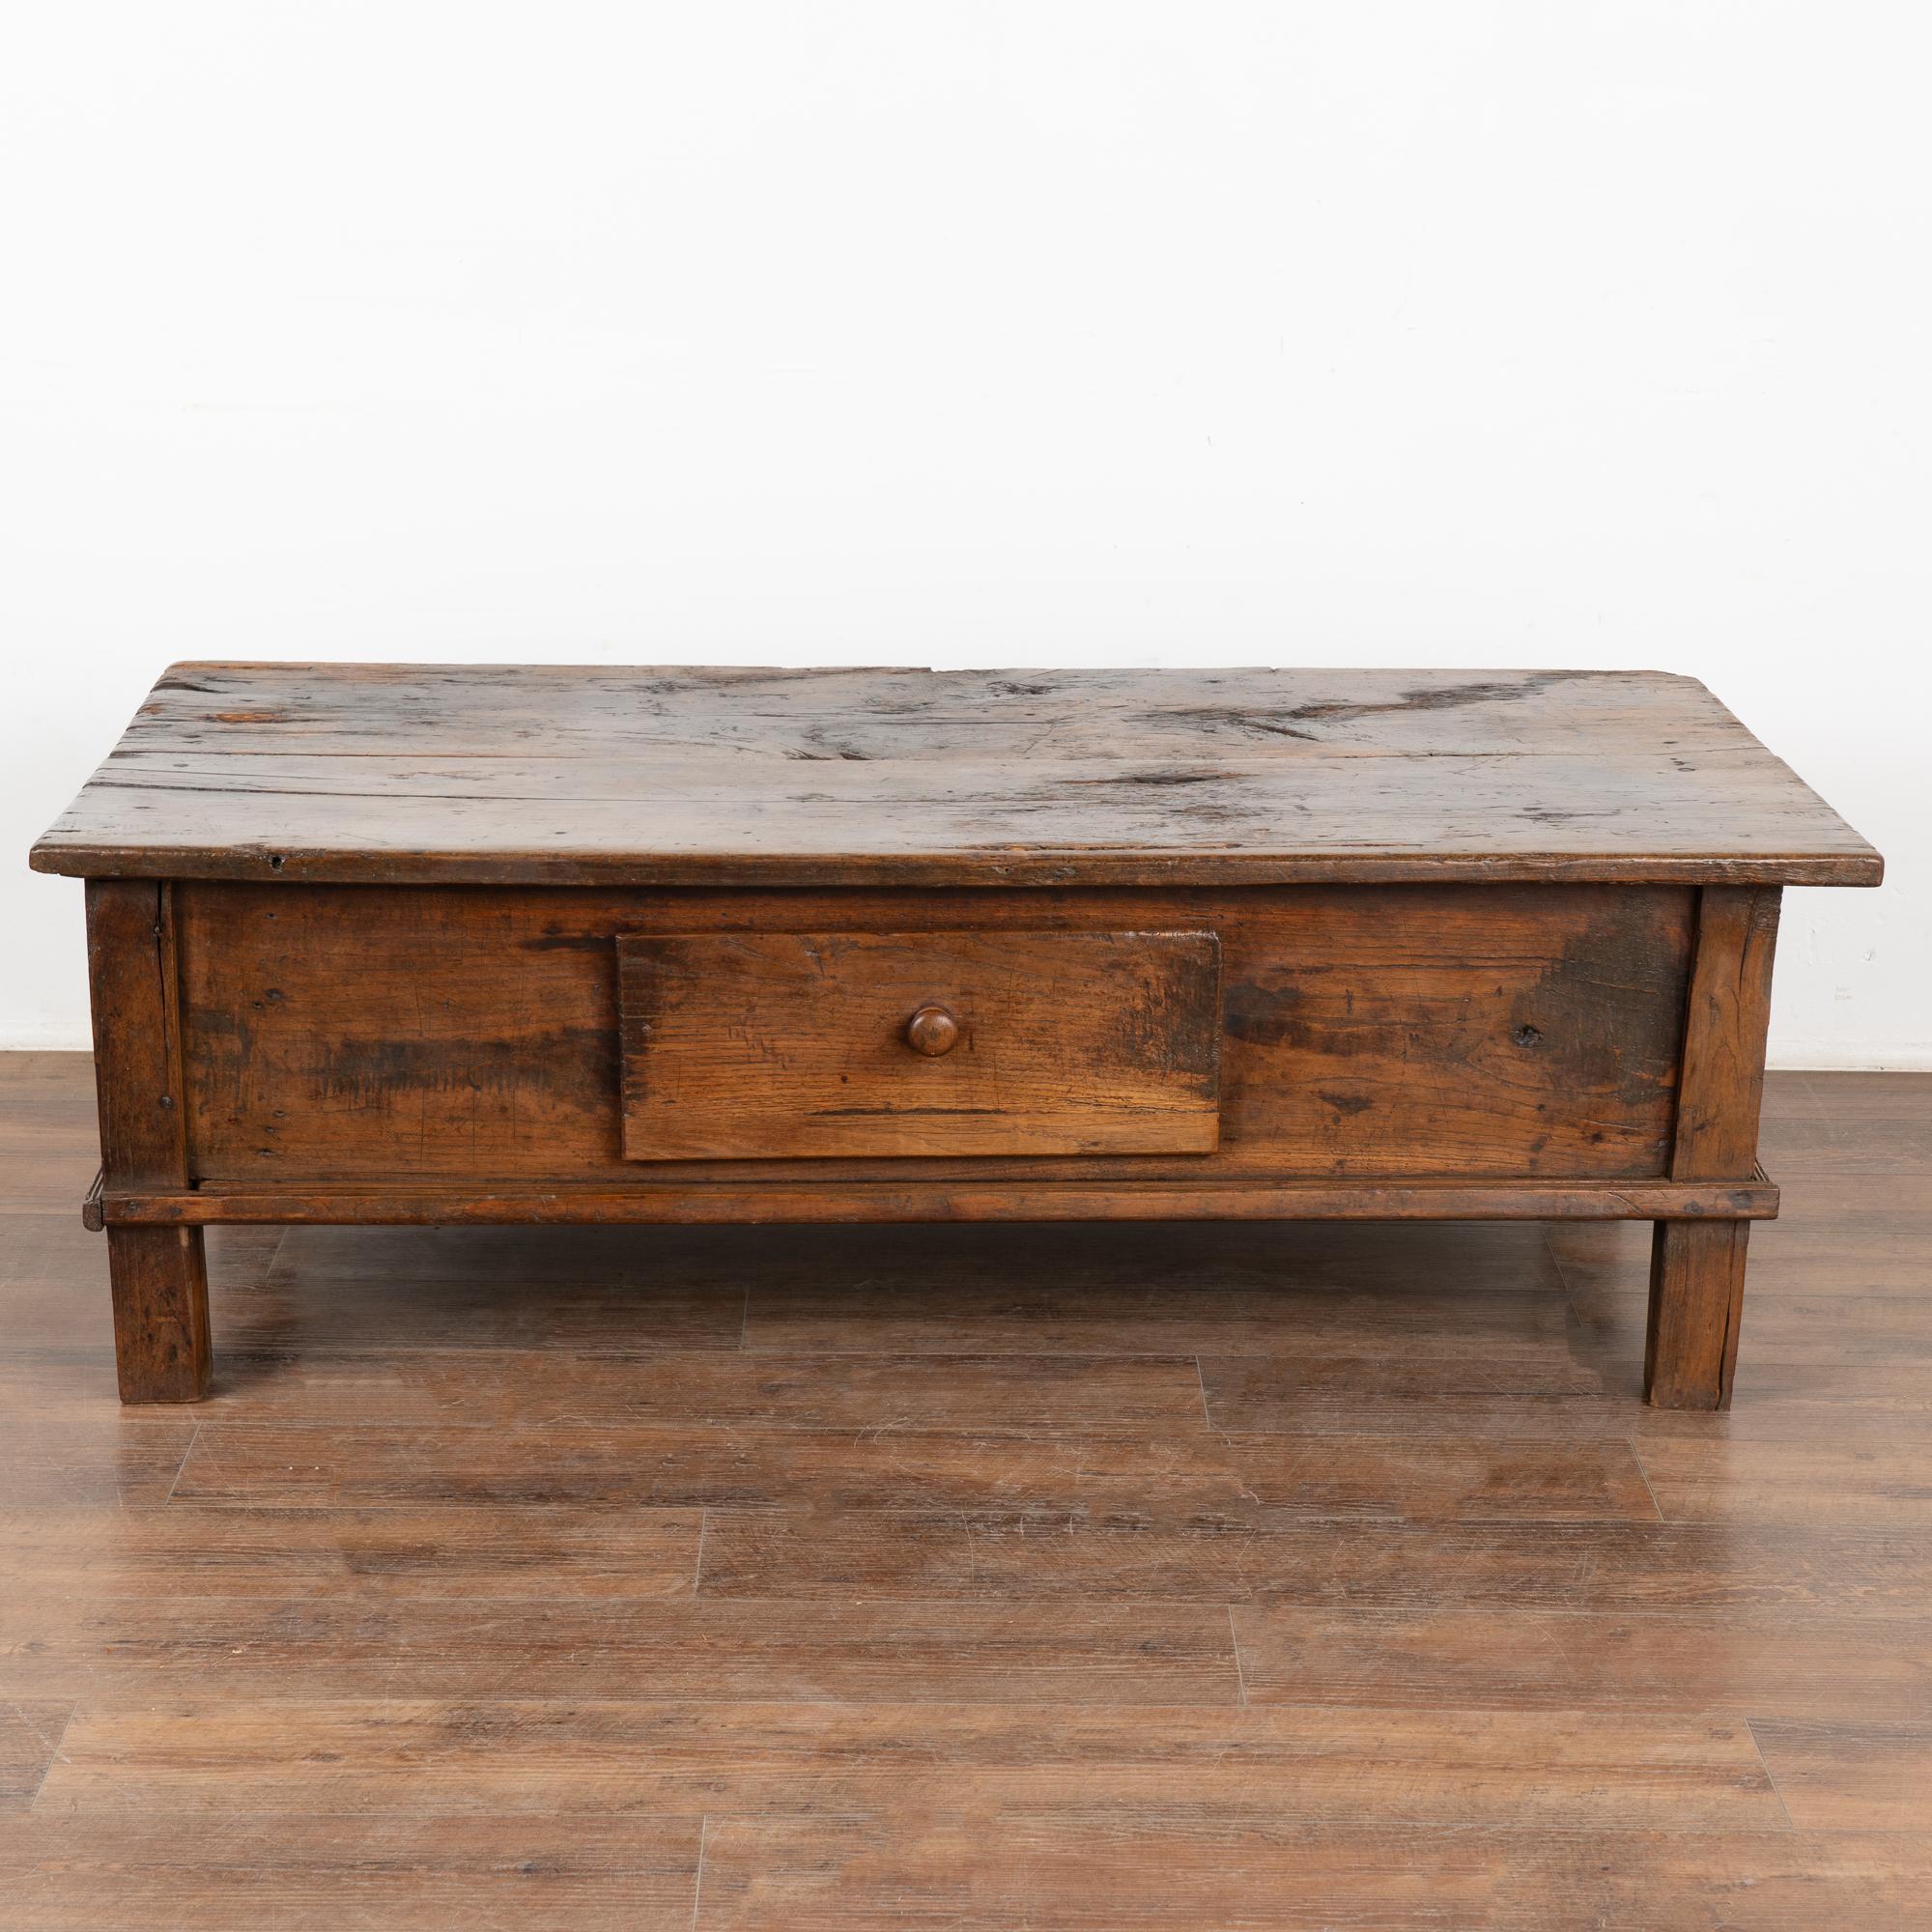 19th Century French Country Coffee Table with One Drawer, circa 1820-40